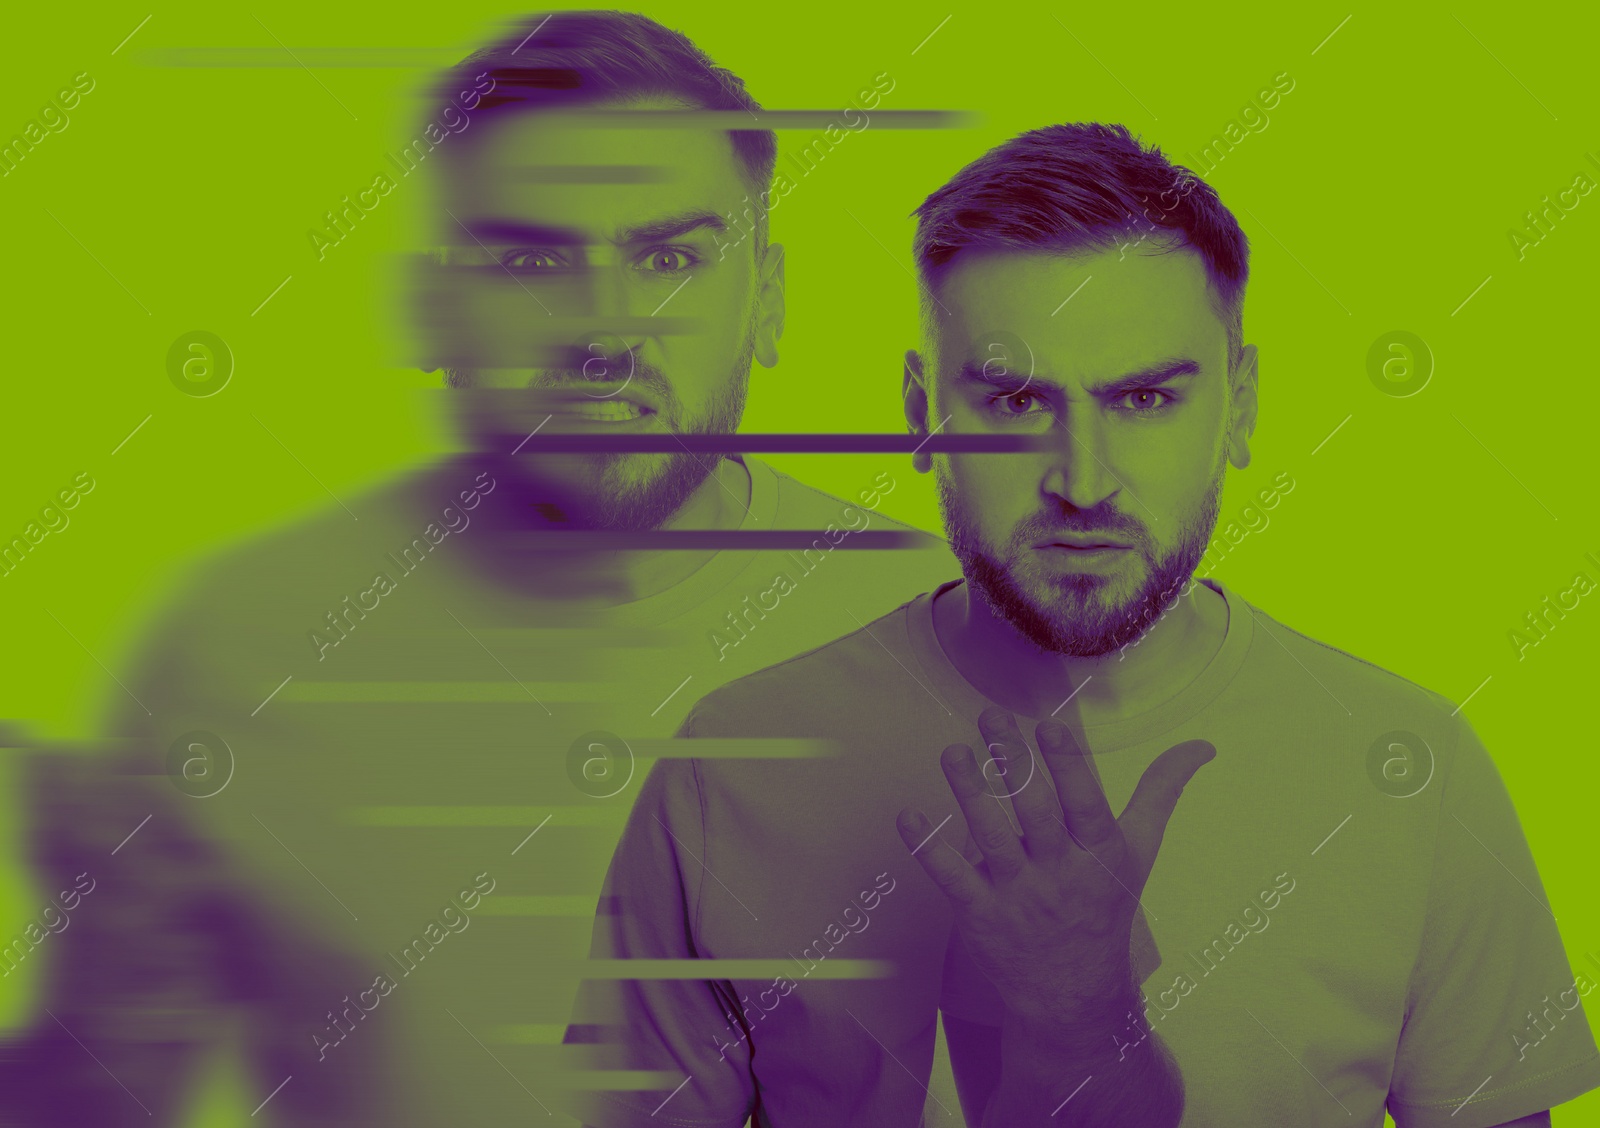 Image of Man suffering from paranoia on yellow green background, color toned. Glitch effect